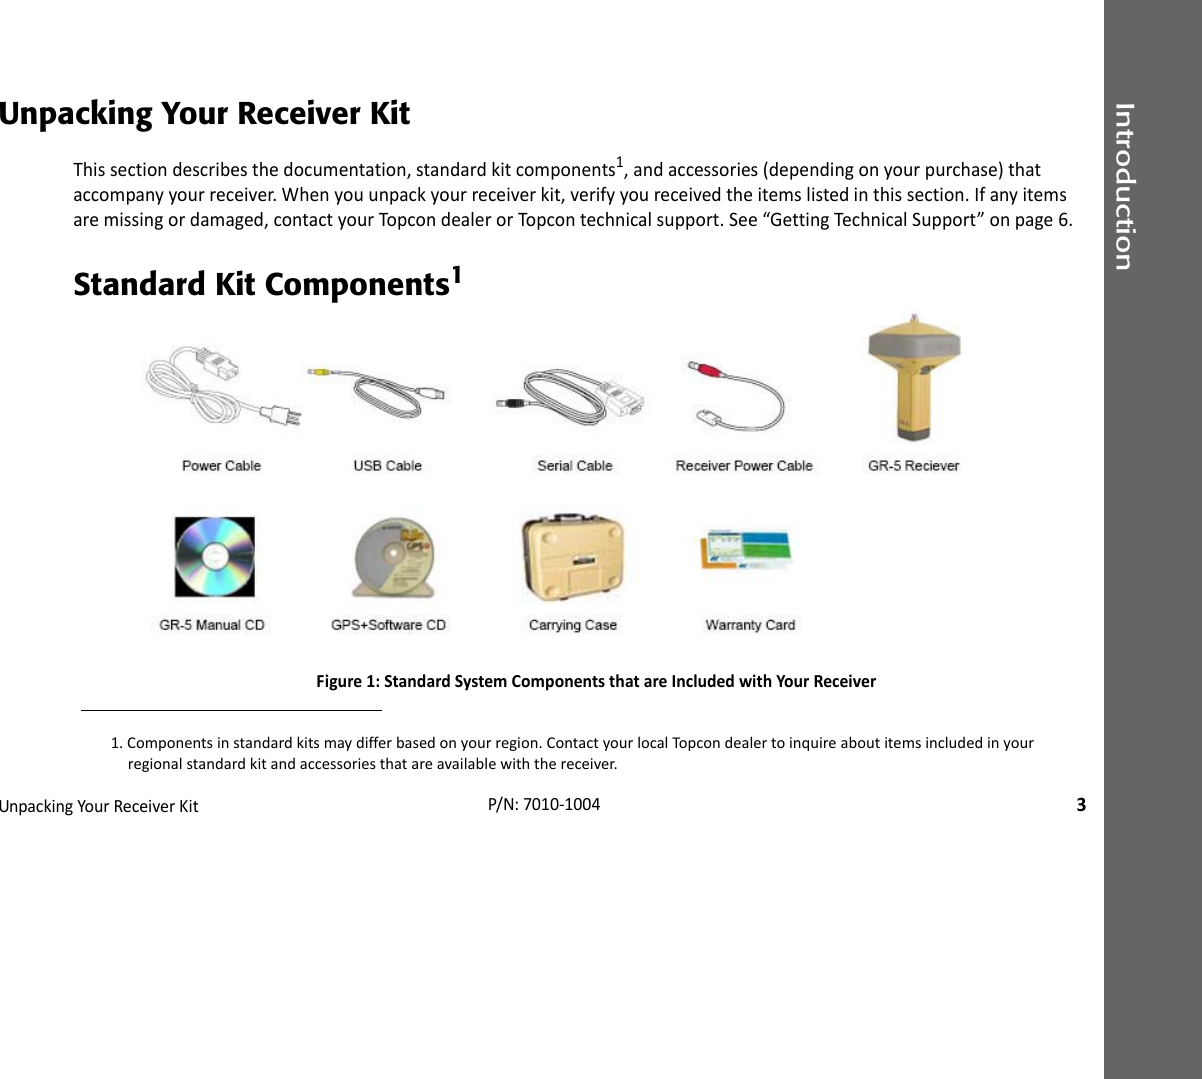 IntroductionUnpackingYourReceiverKit3P/N:7010‐1004Unpacking Your Receiver KitThissectiondescribesthedocumentation,standardkitcomponents1,andaccessories(dependingonyourpurchase)thataccompanyyourreceiver.Whenyouunpackyourreceiverkit,verifyyoureceivedtheitemslistedinthissection.Ifanyitemsaremissingordamaged,contactyourTopcondealerorTopcontechnicalsupport.See“GettingTechnicalSupport”onpage6.Standard Kit Components1 Figure1:StandardSystemComponentsthatareIncludedwithYourReceiver1.Componentsinstandardkitsmaydifferbasedonyourregion.ContactyourlocalTopcondealertoinquireaboutitemsincludedinyourregionalstandardkitandaccessoriesthatareavailablewiththereceiver.